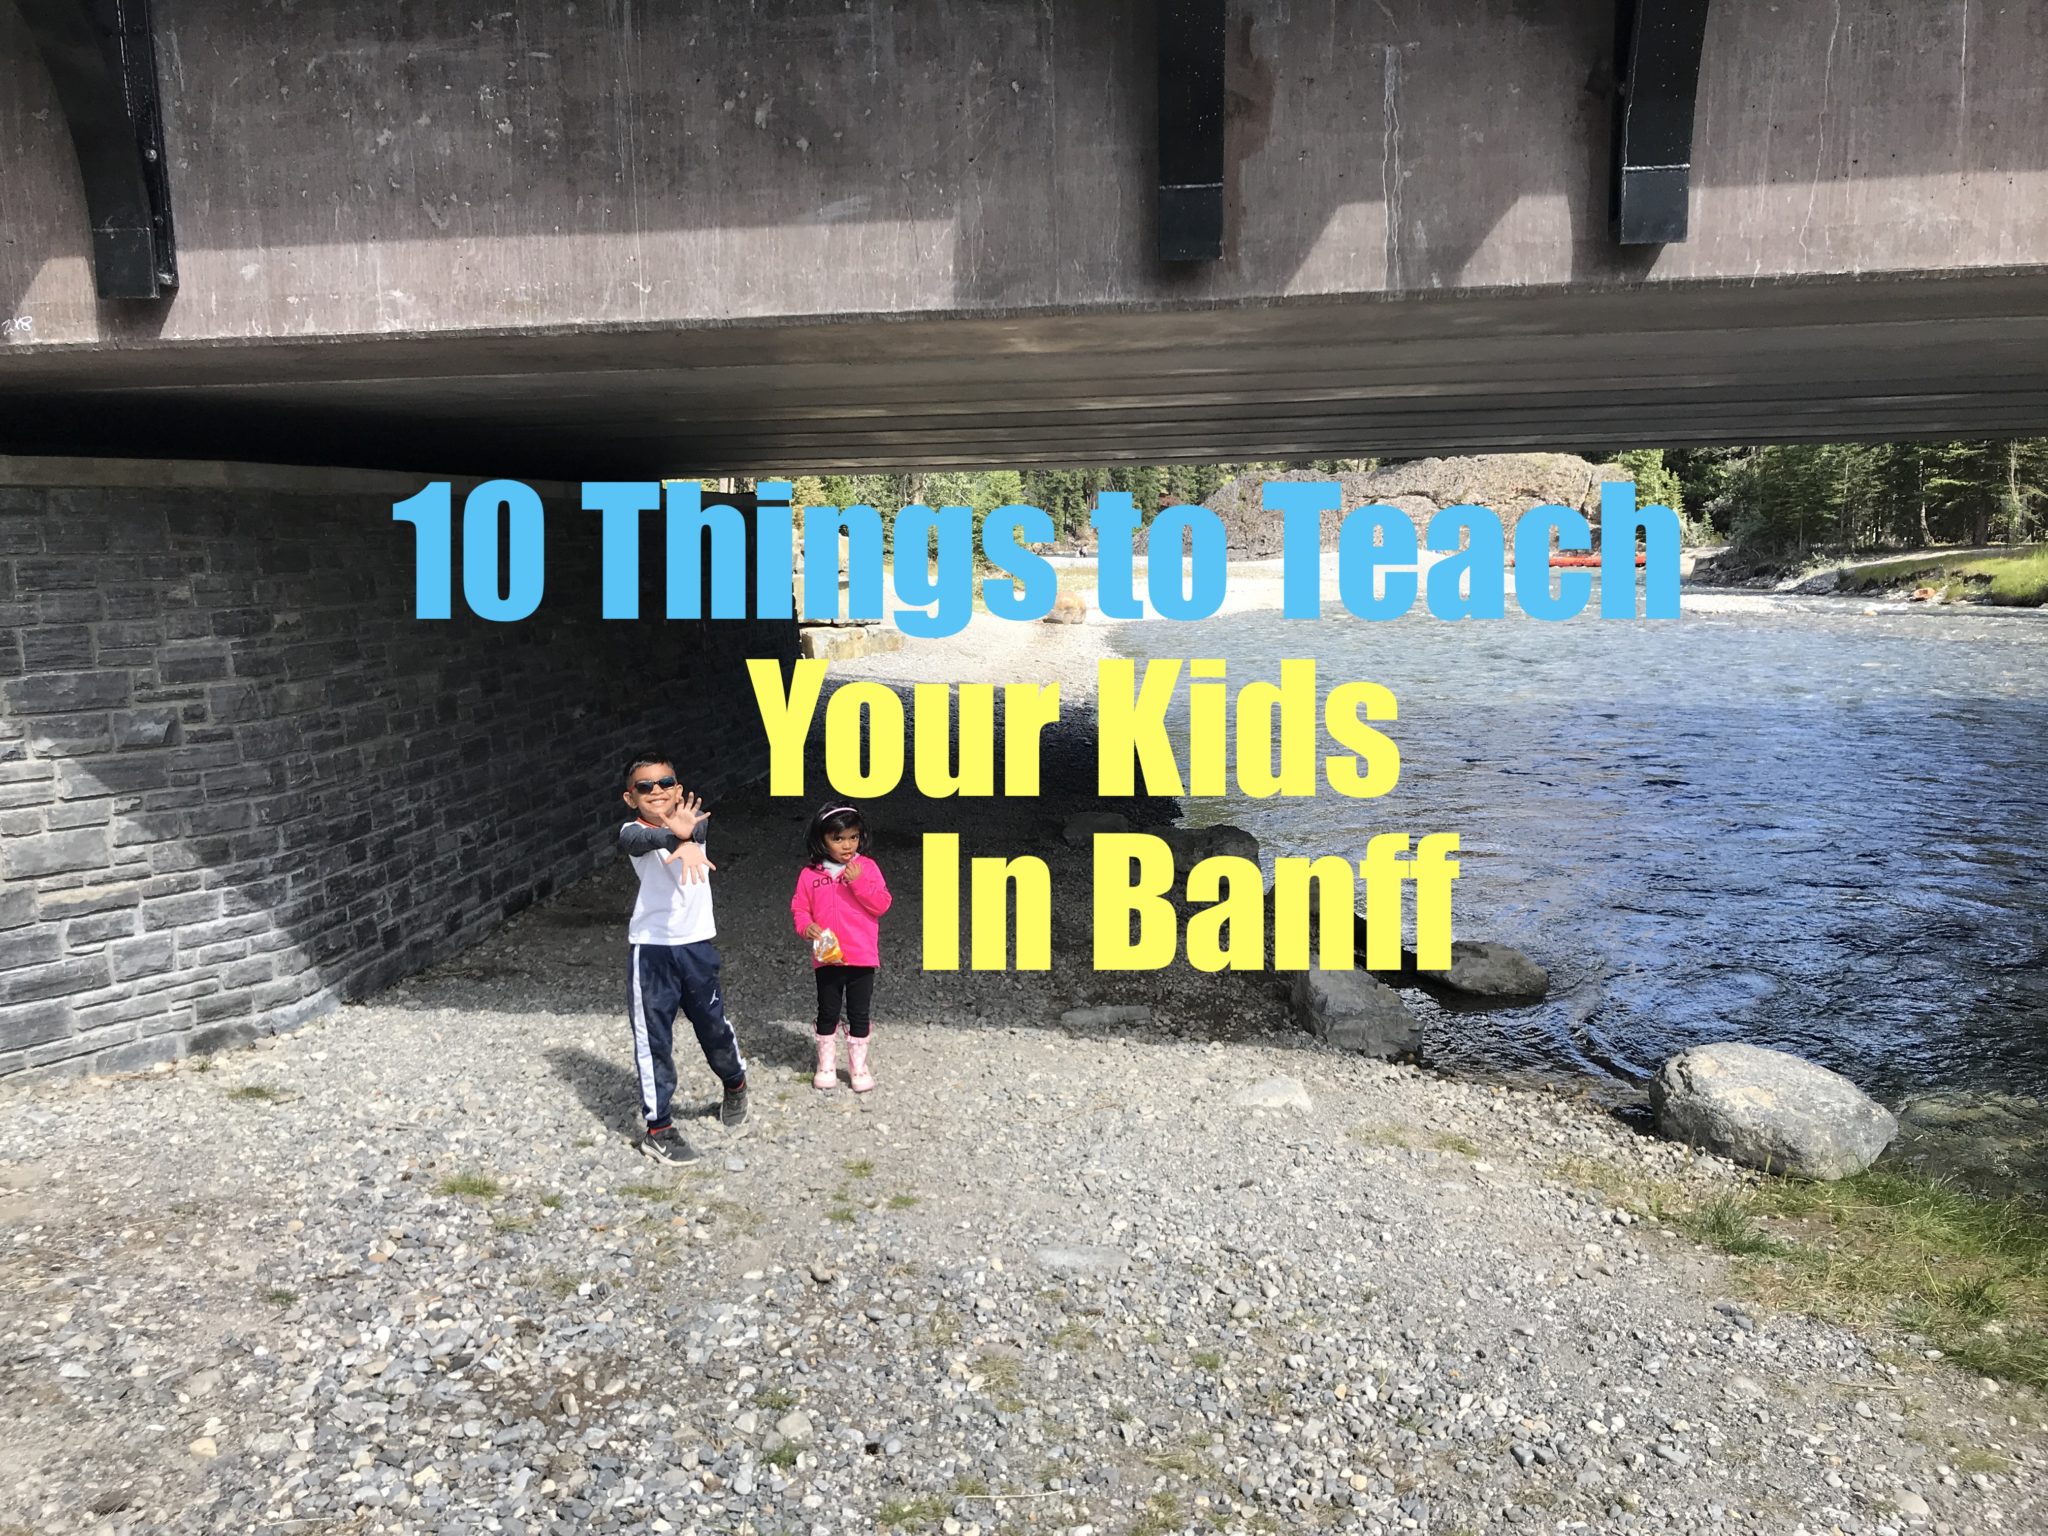 10 Things to Teach your kids in Banff